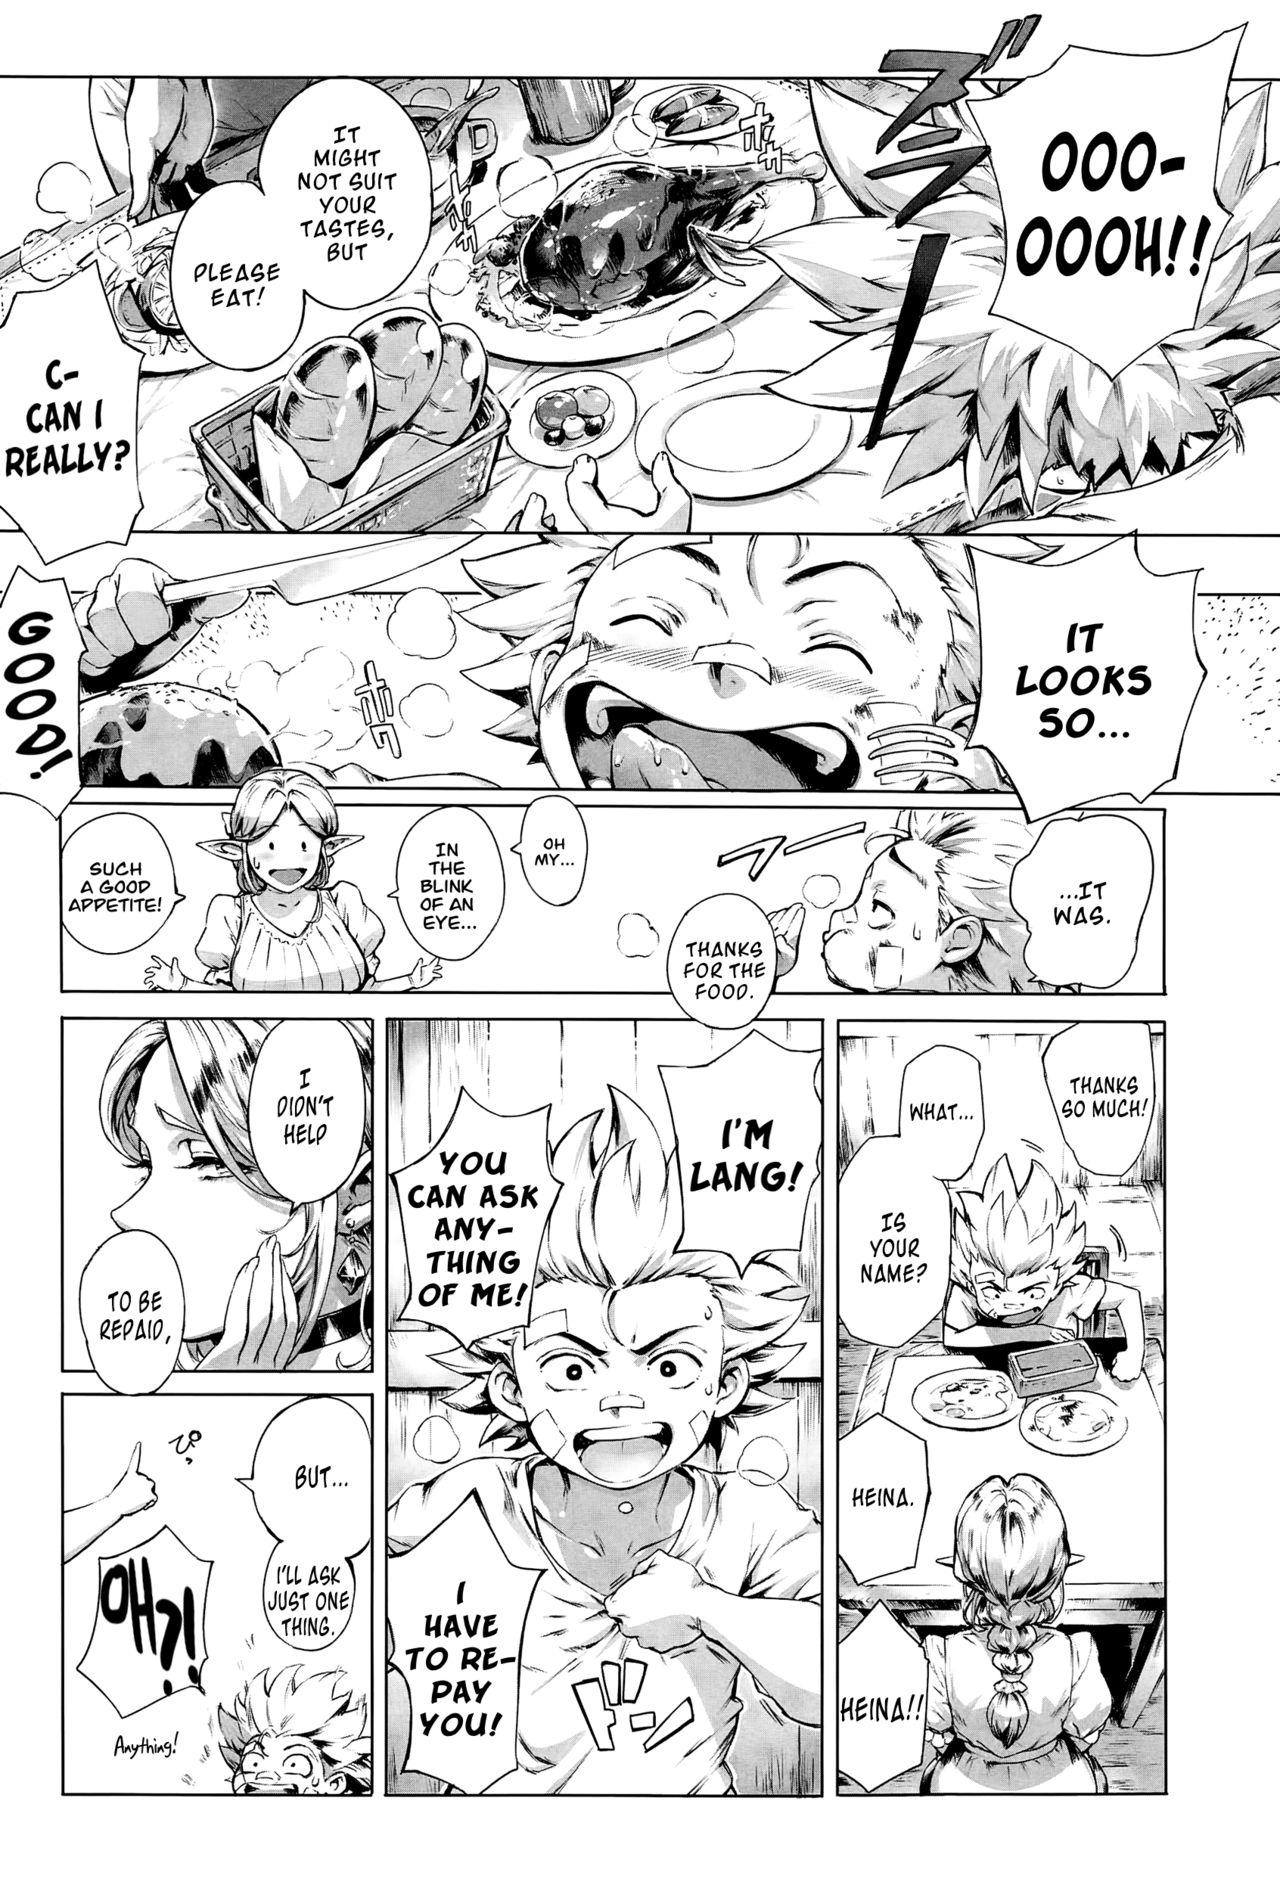 Puta Koko ga Tanetsuke Frontier | This Is The Mating Frontier! Ch. 1-2 Heels - Page 4